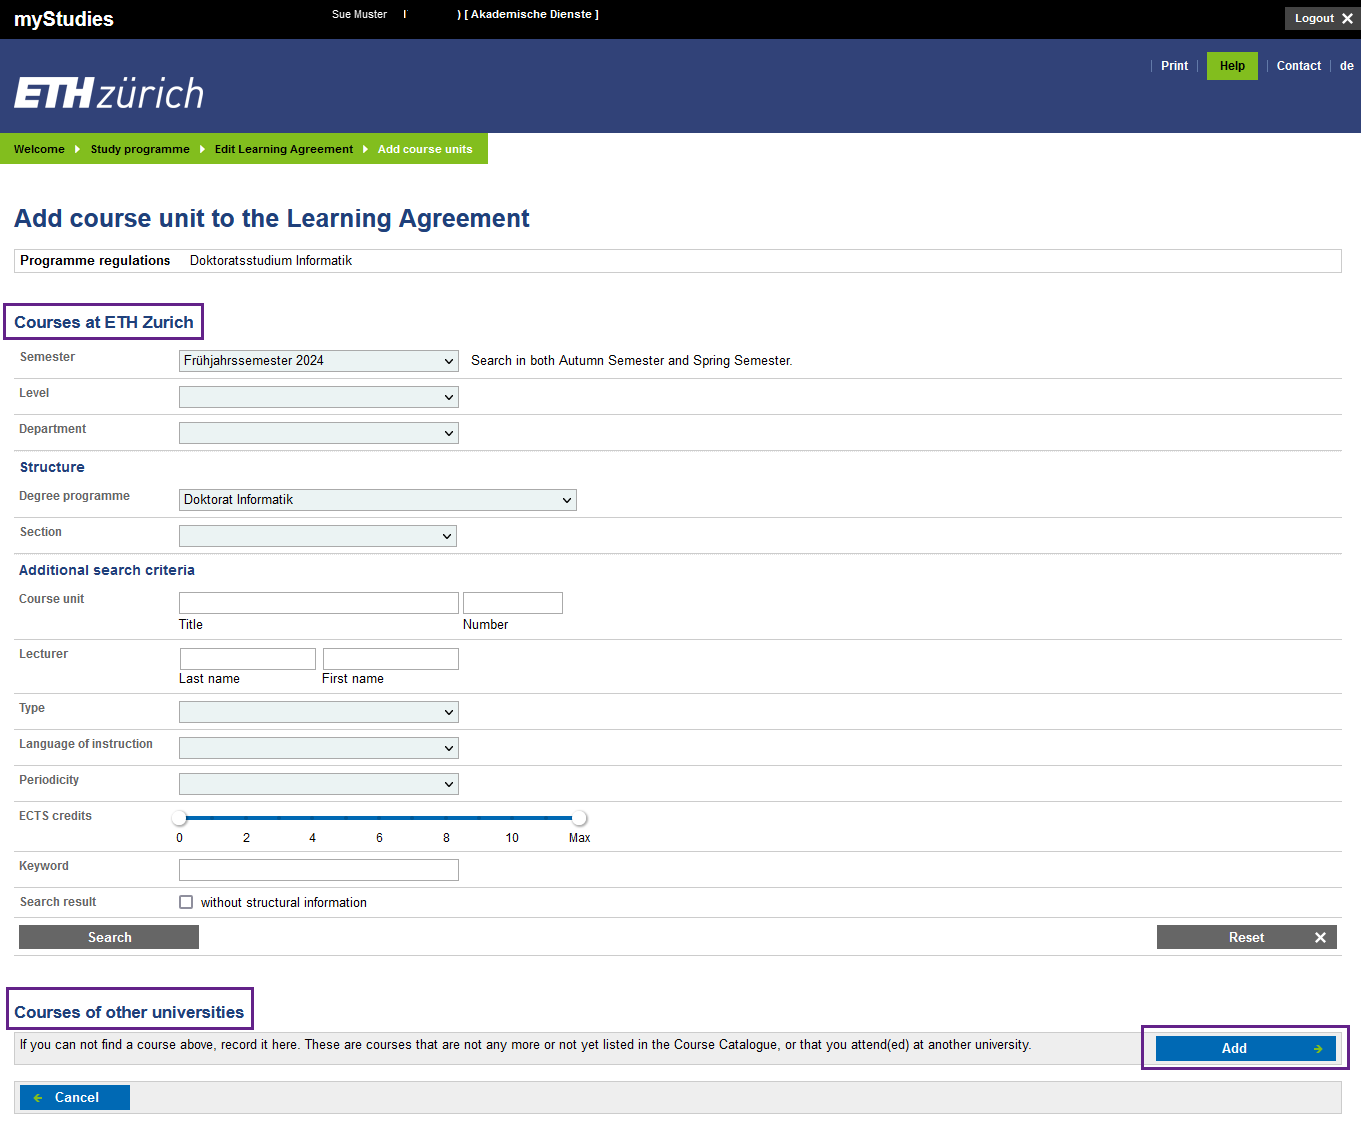 A screenshot from myStudies is shown. The screenshot shows the adding of a course unit to the Learning Agreement.